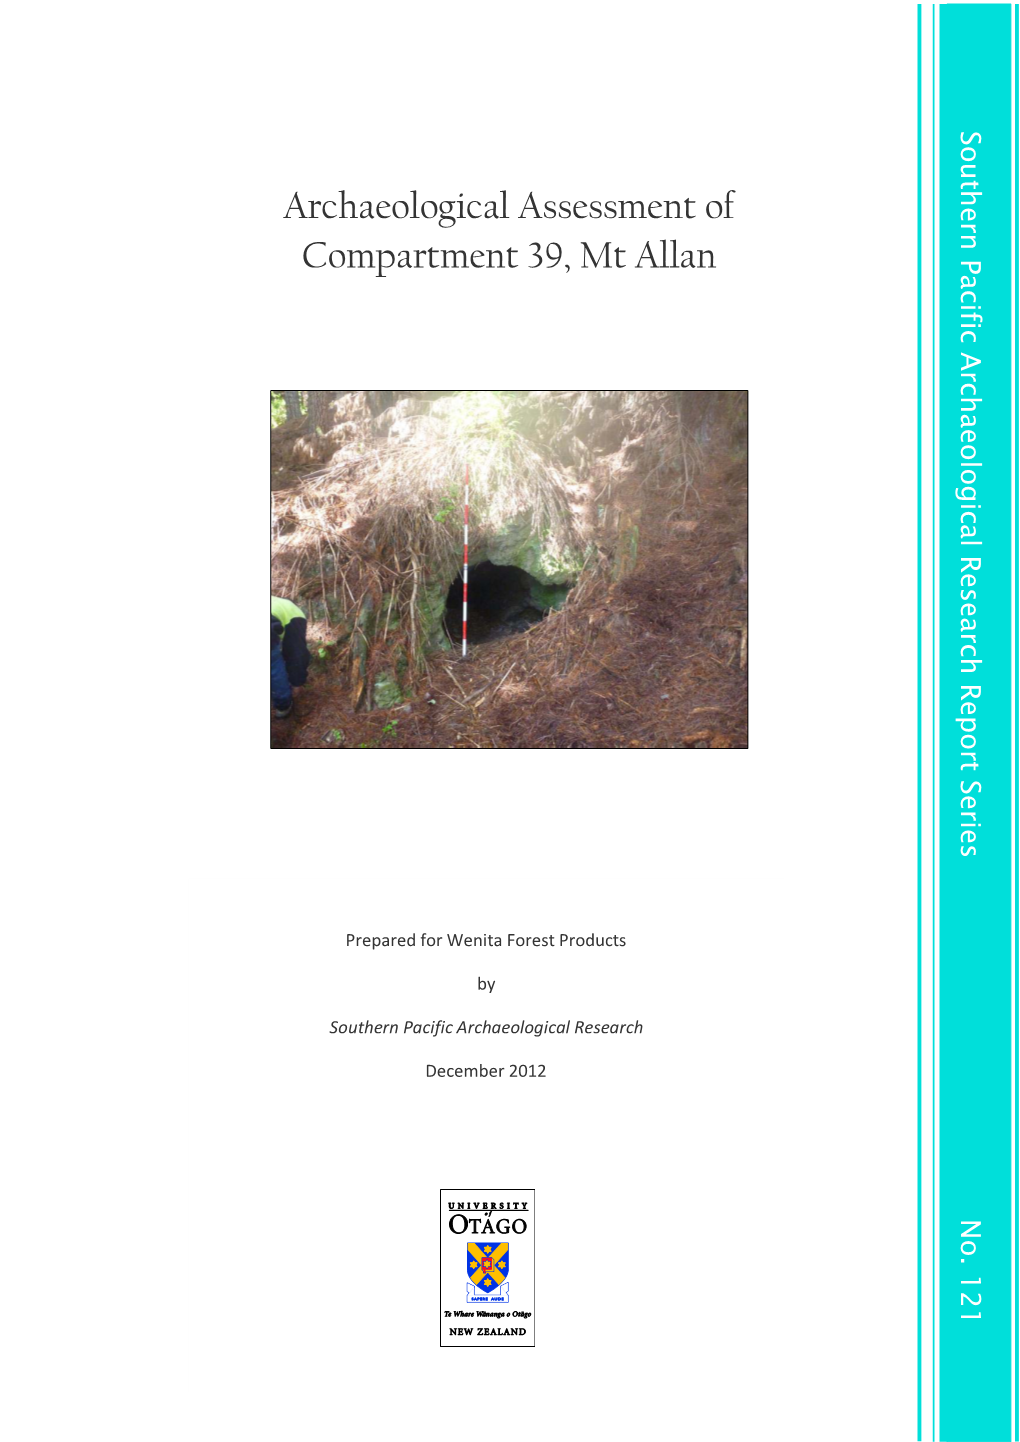 Archaeological Assessment of Compartment 39, Mt Allan